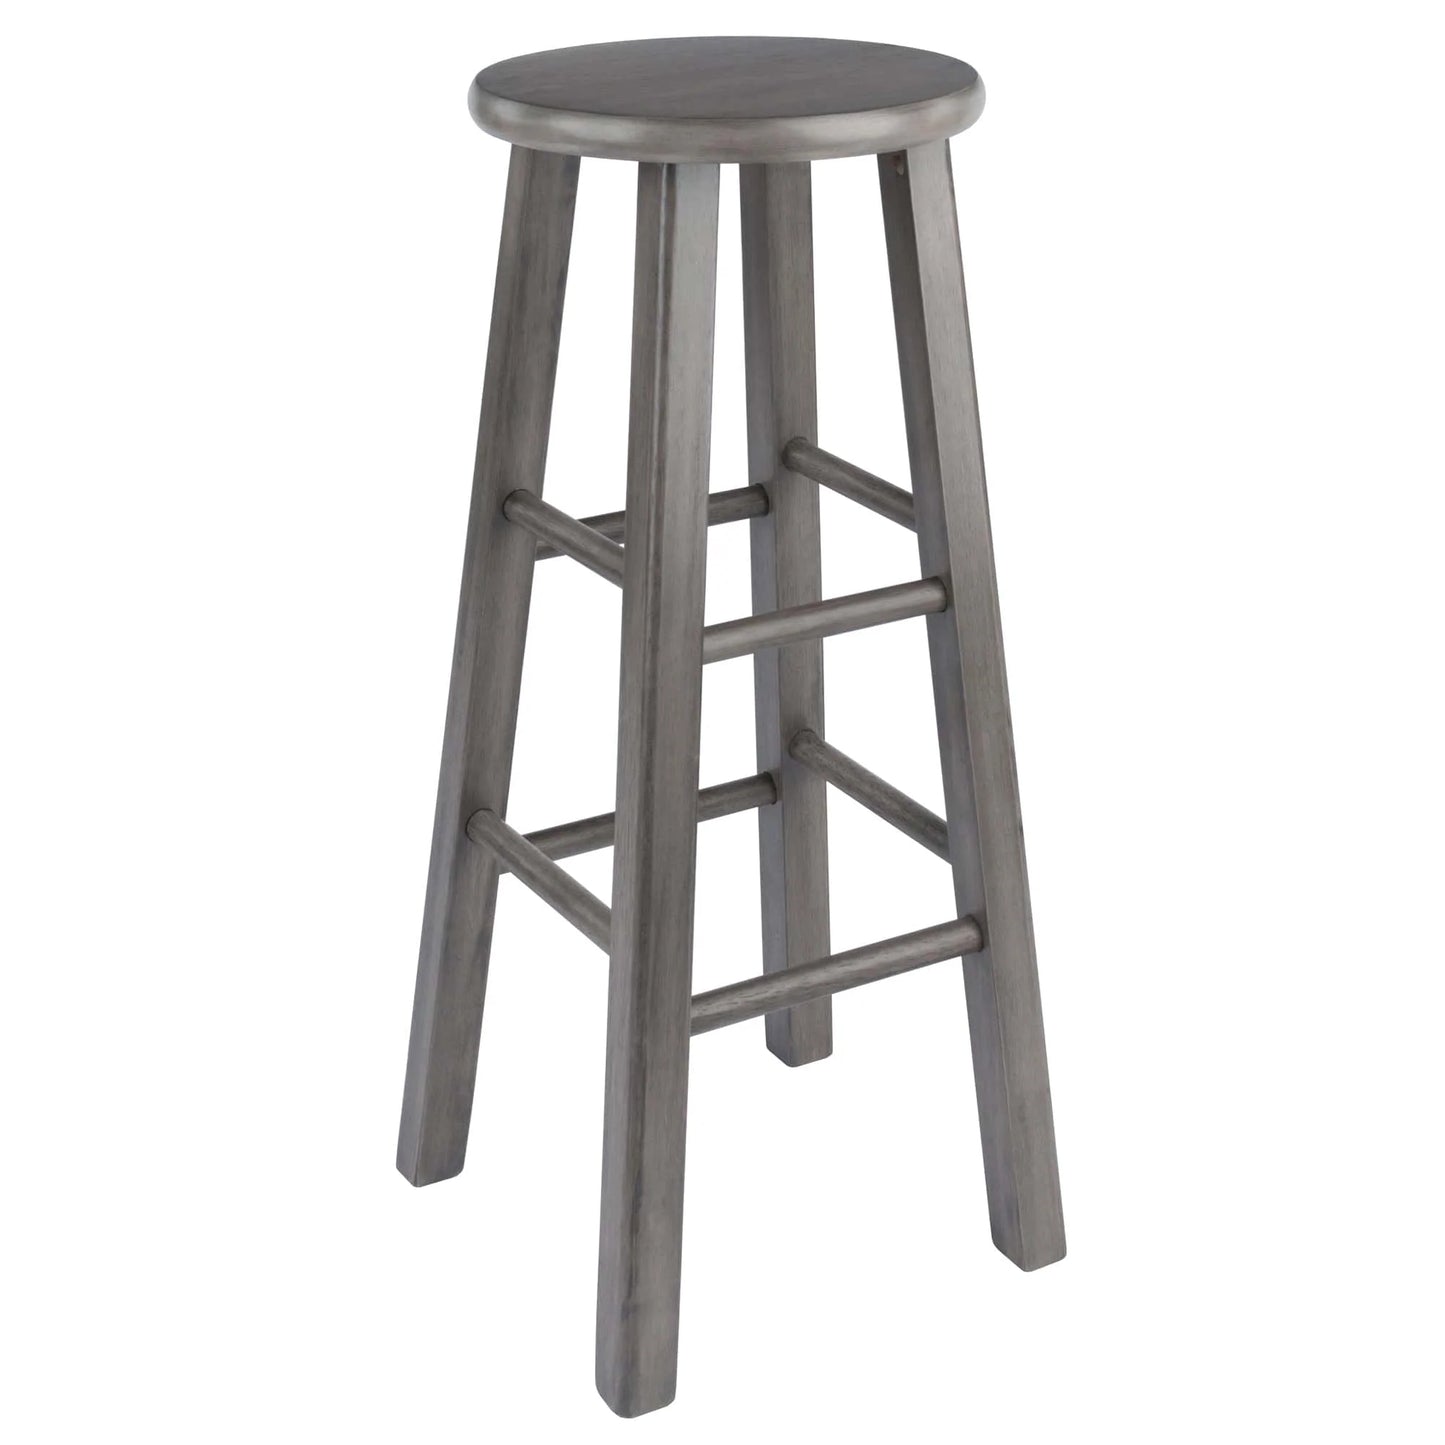 WINSOME Stool Ivy Square Leg Bar Stool, Rustic Oyster Gray